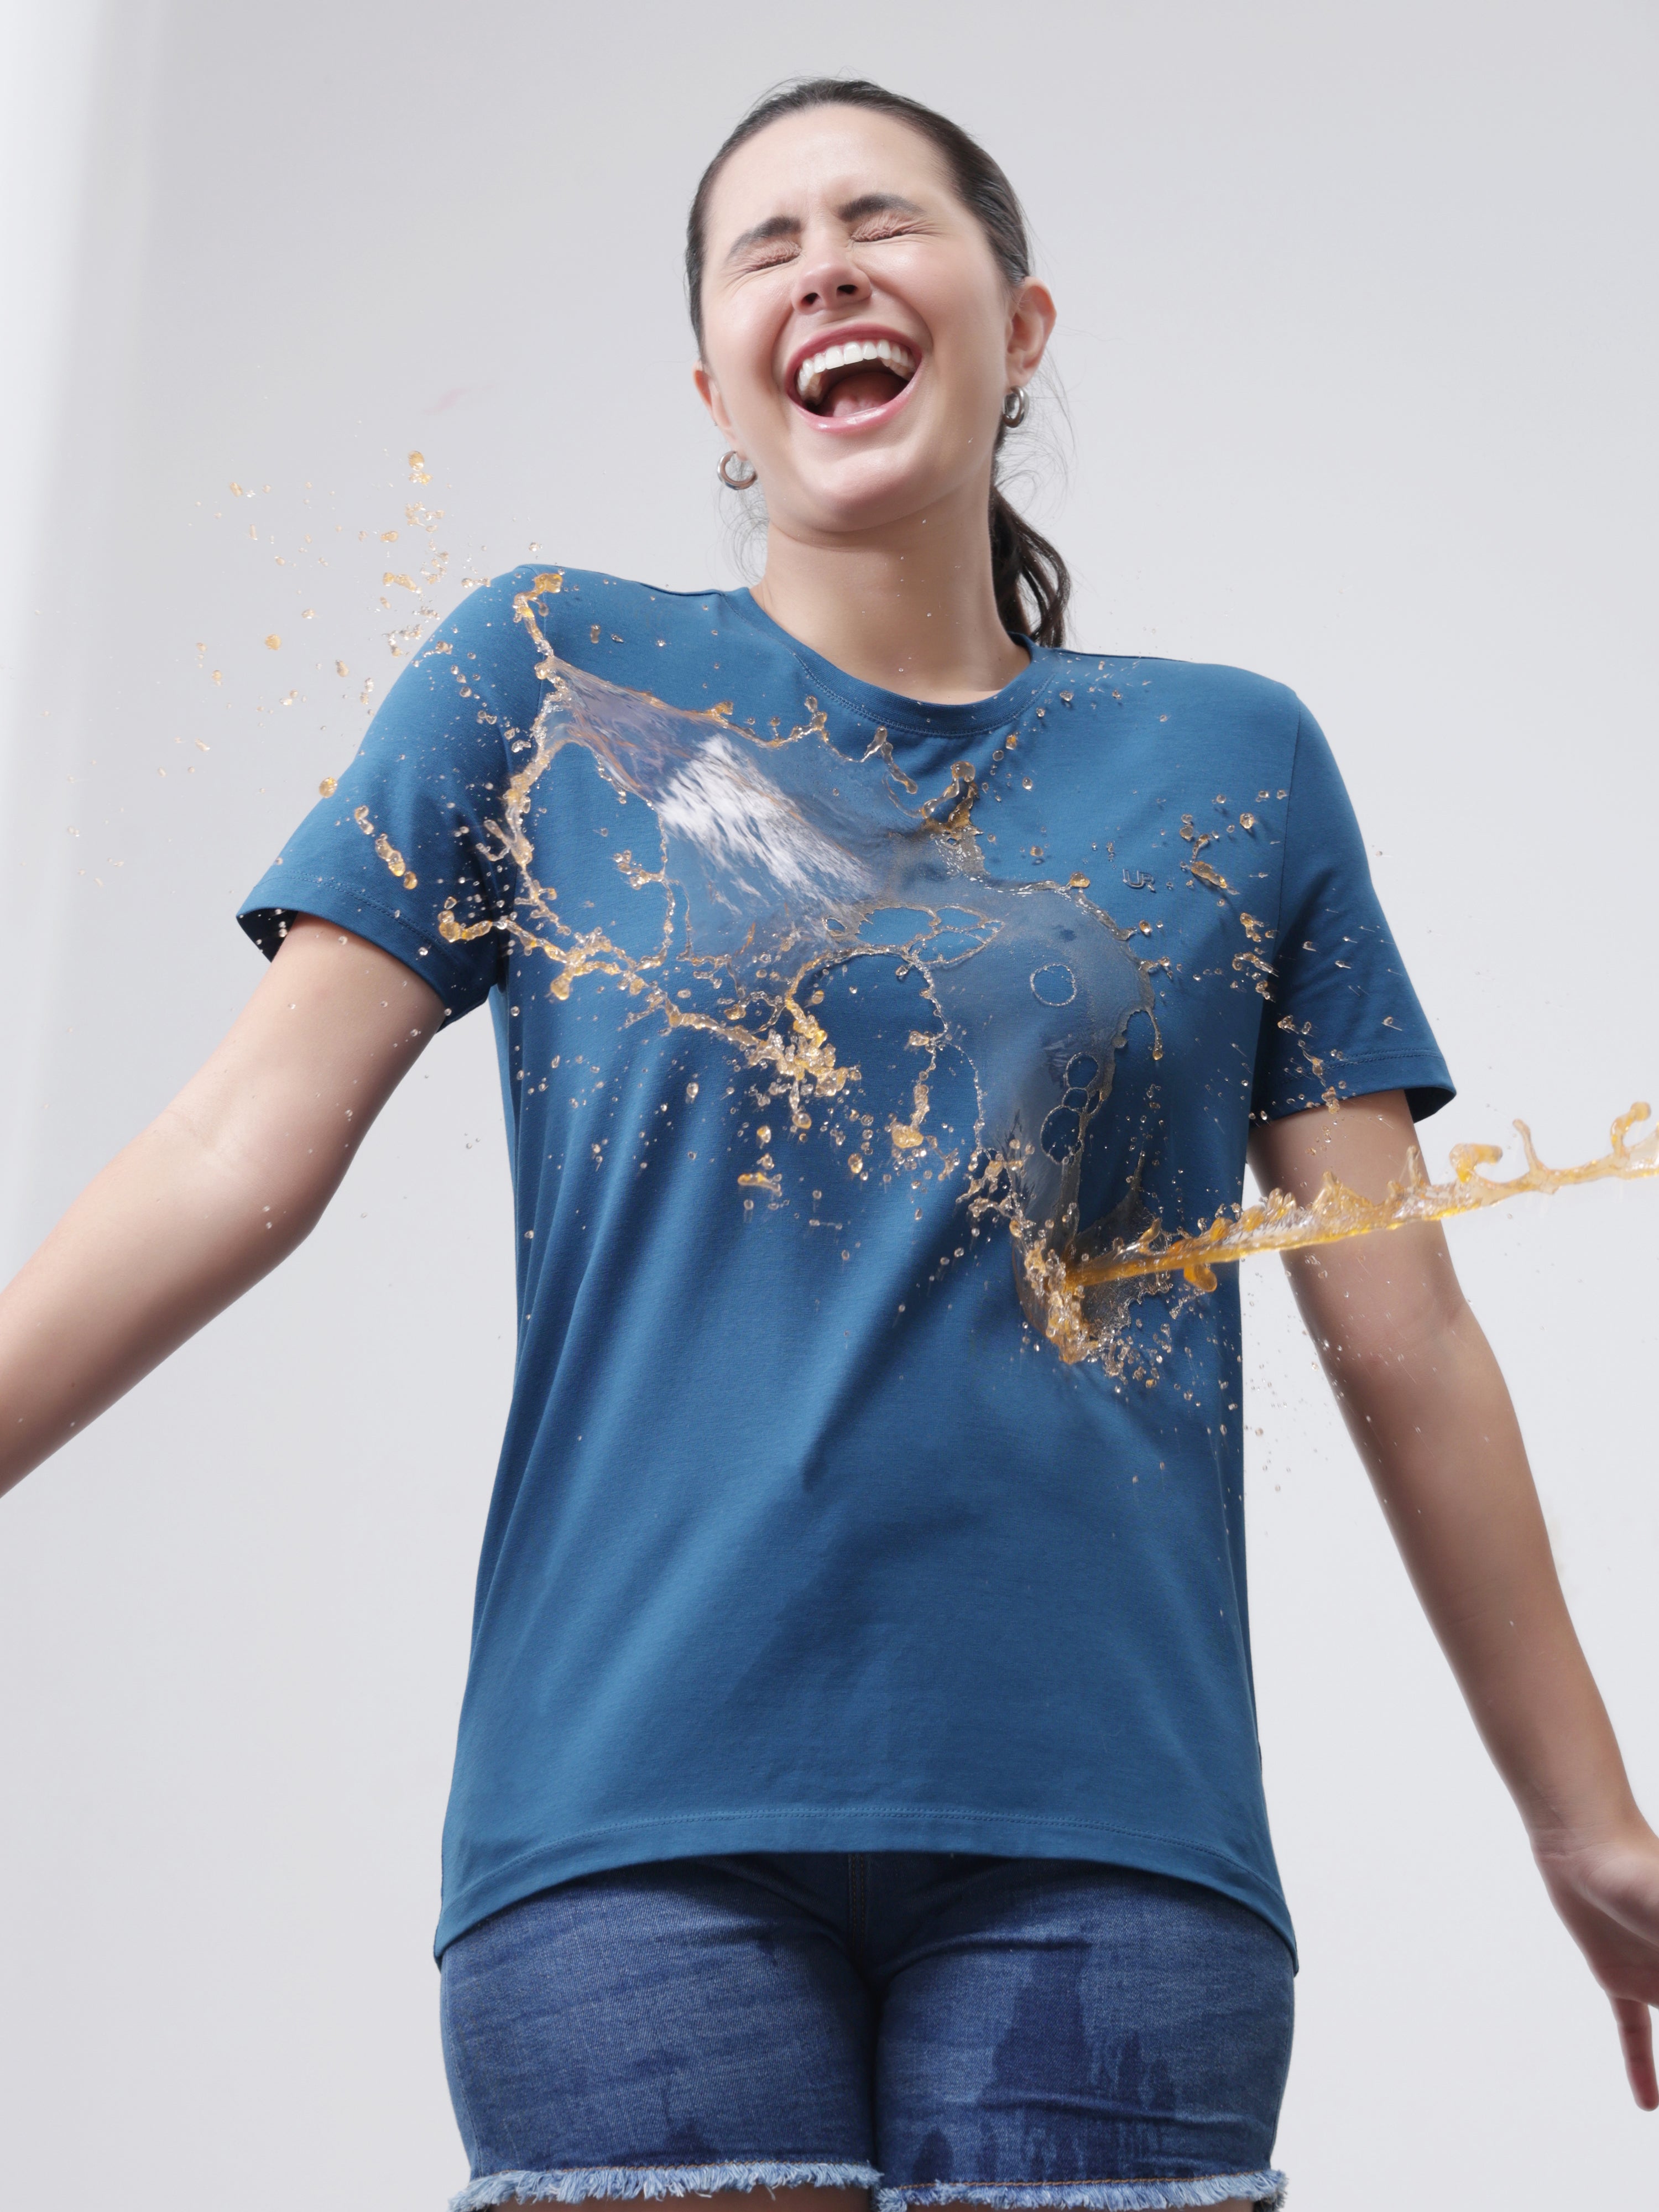 Woman wearing Sea Blue Turms T-shirt demonstrating stain-proof and anti-odor technology with liquid repelling off the fabric.